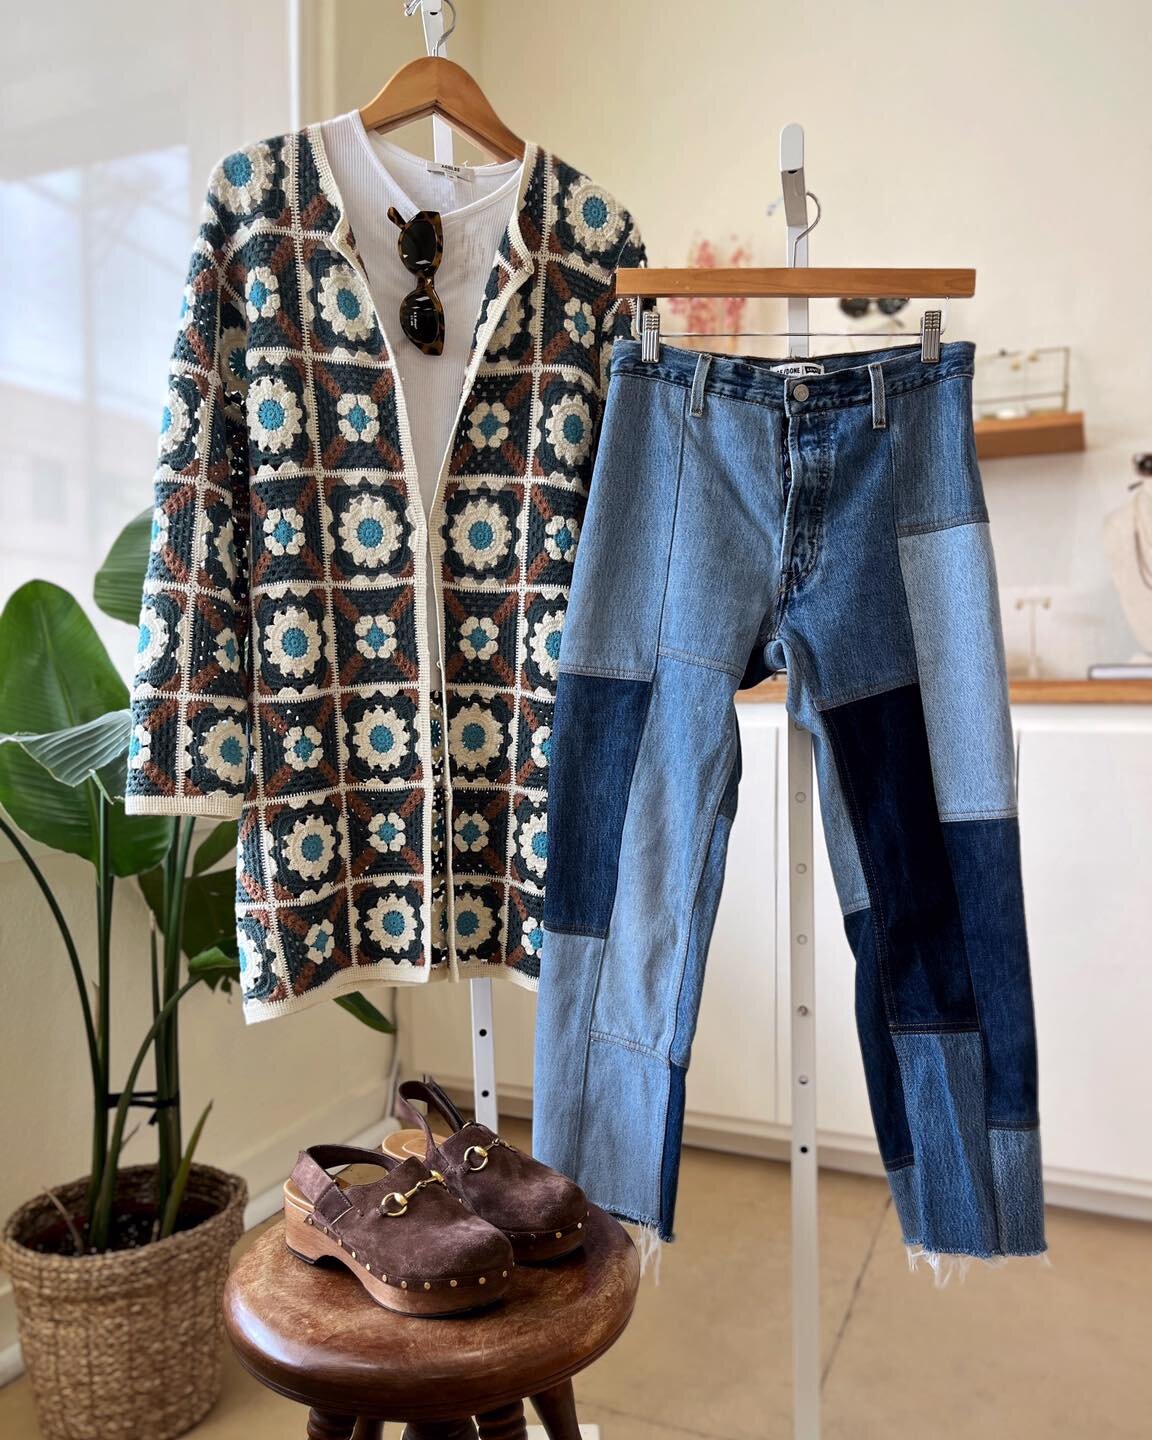 Patchwork crochet 🤝 patchwork denim

Then contrast the two with suede clogs like this designer verison from Gucci - available online and in store for you to try on at our San Antonio consignment boutique in Olmos Park!

. . .

#designerresale #satxs